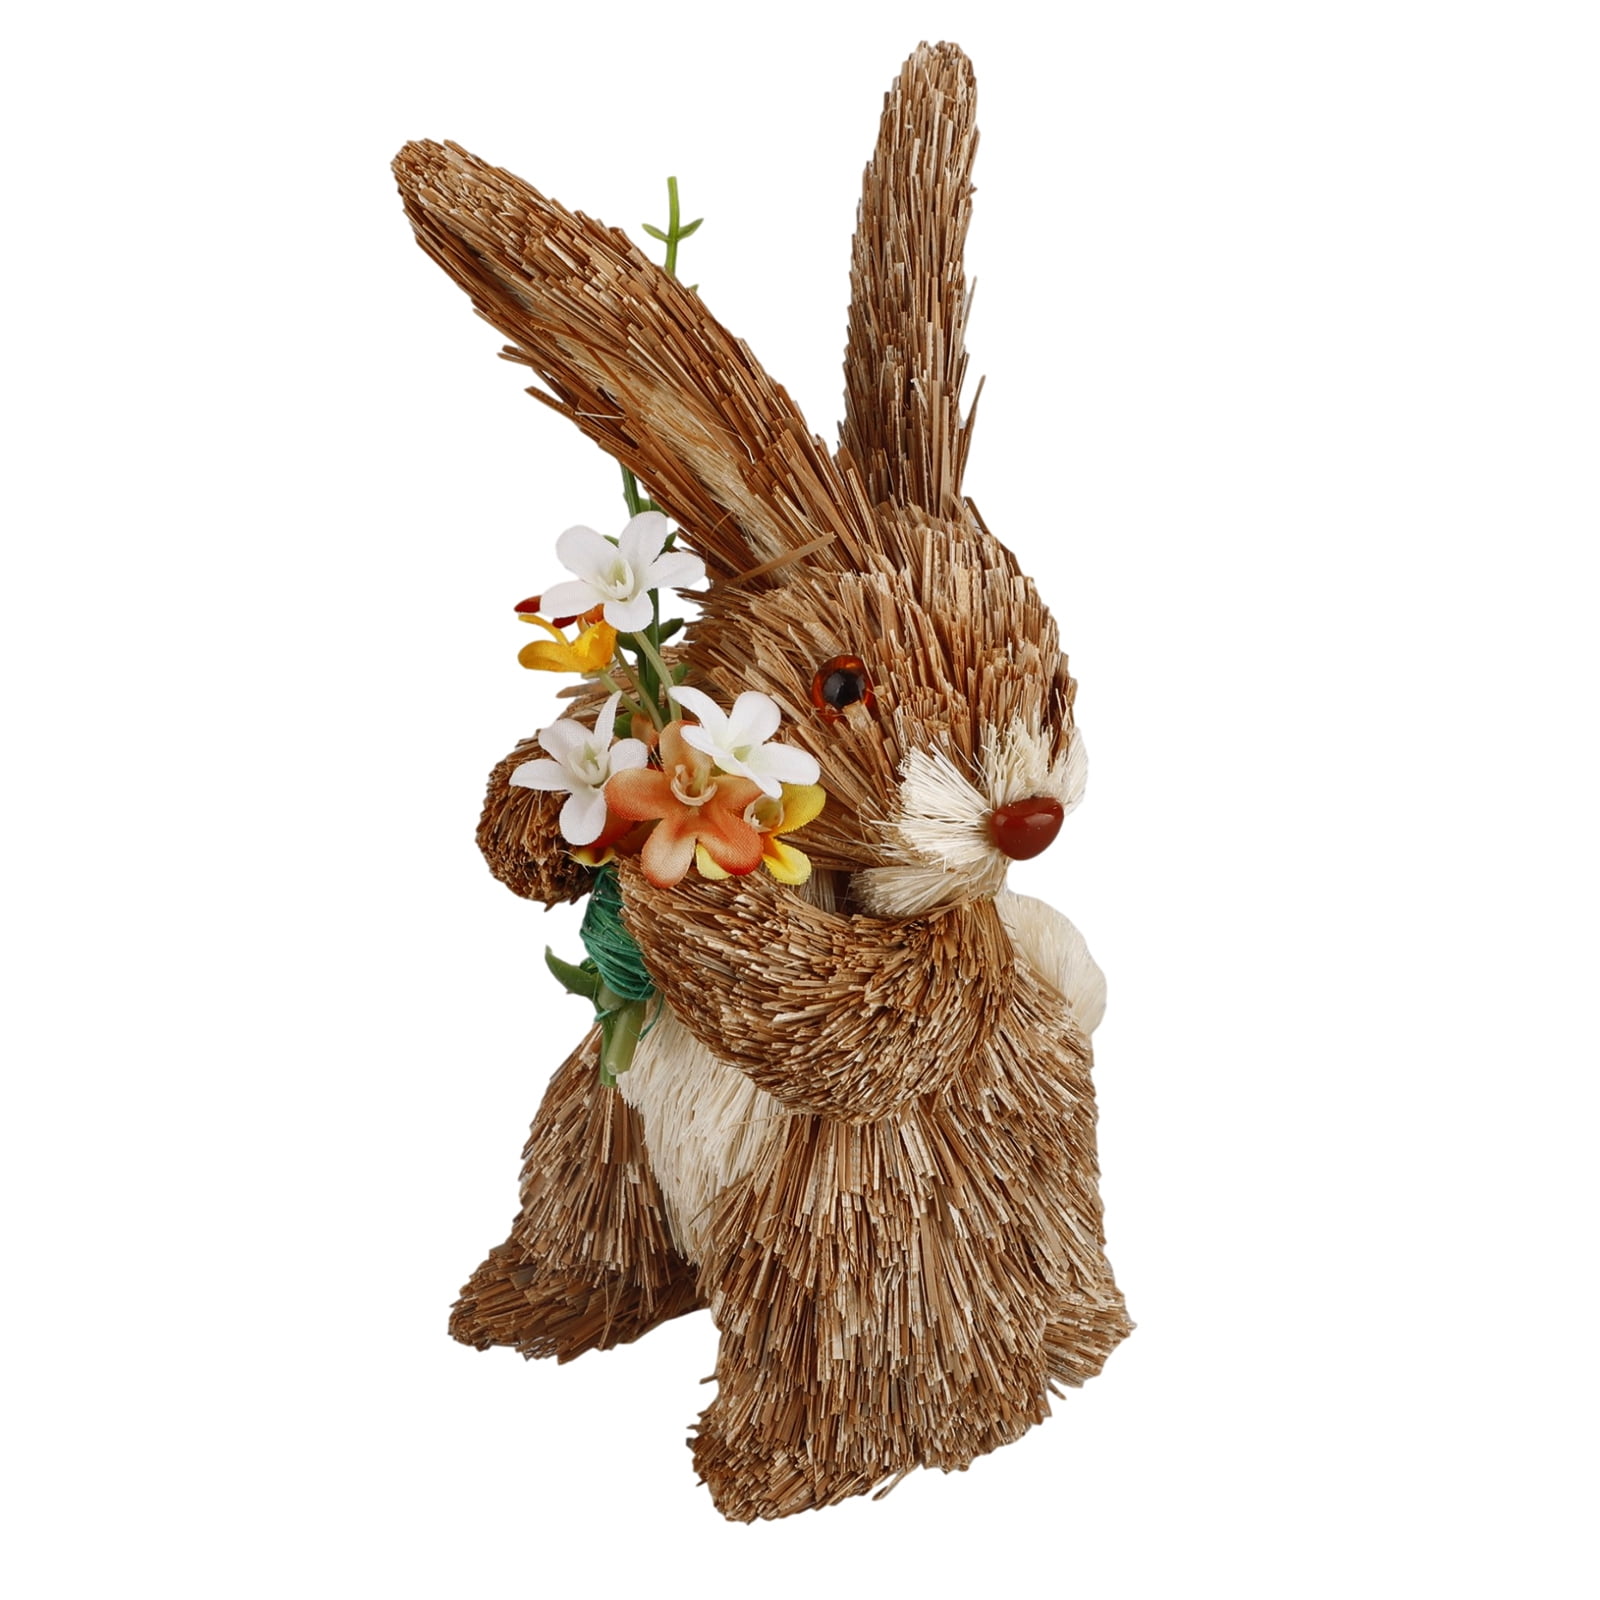 Yirtree Hand Woven Artificial Straw Bunny Rustic Realistic Photography Prop  Multiple Styles Desktop Ornament Standing Rabbit Figure for Garden